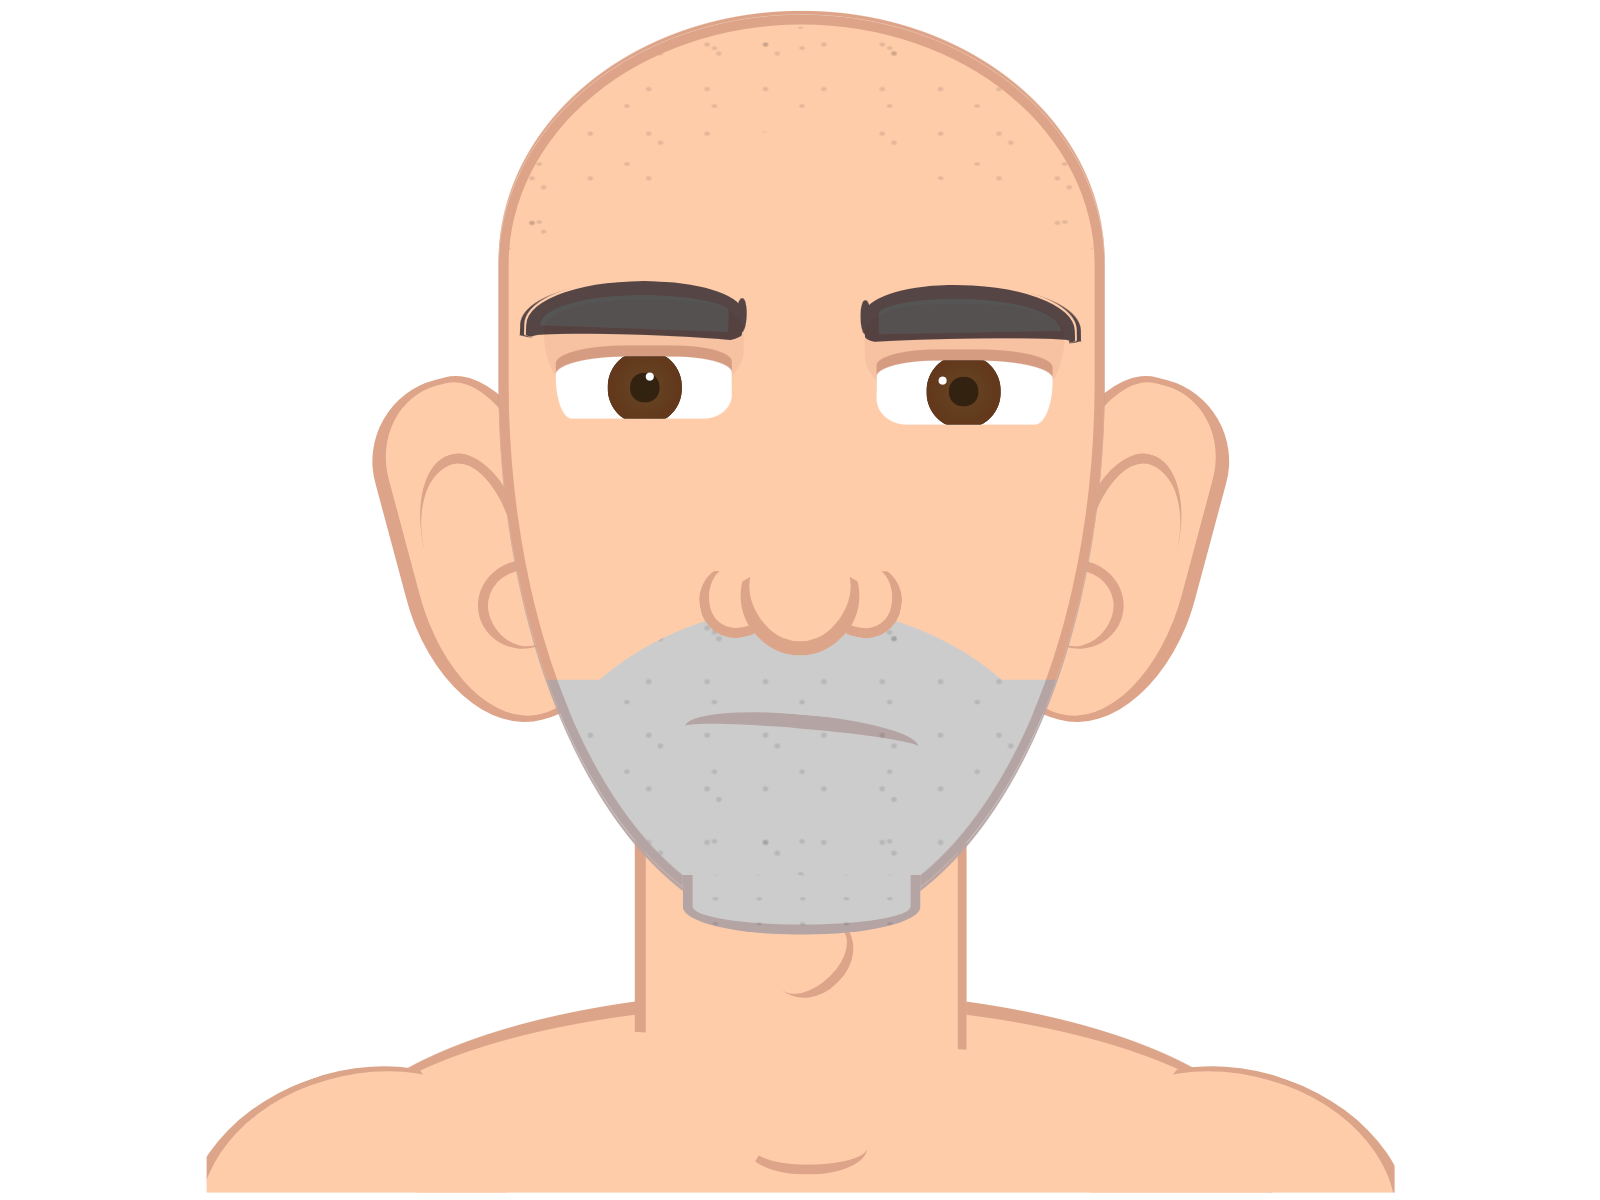 Cartoon of a man with a serious expression